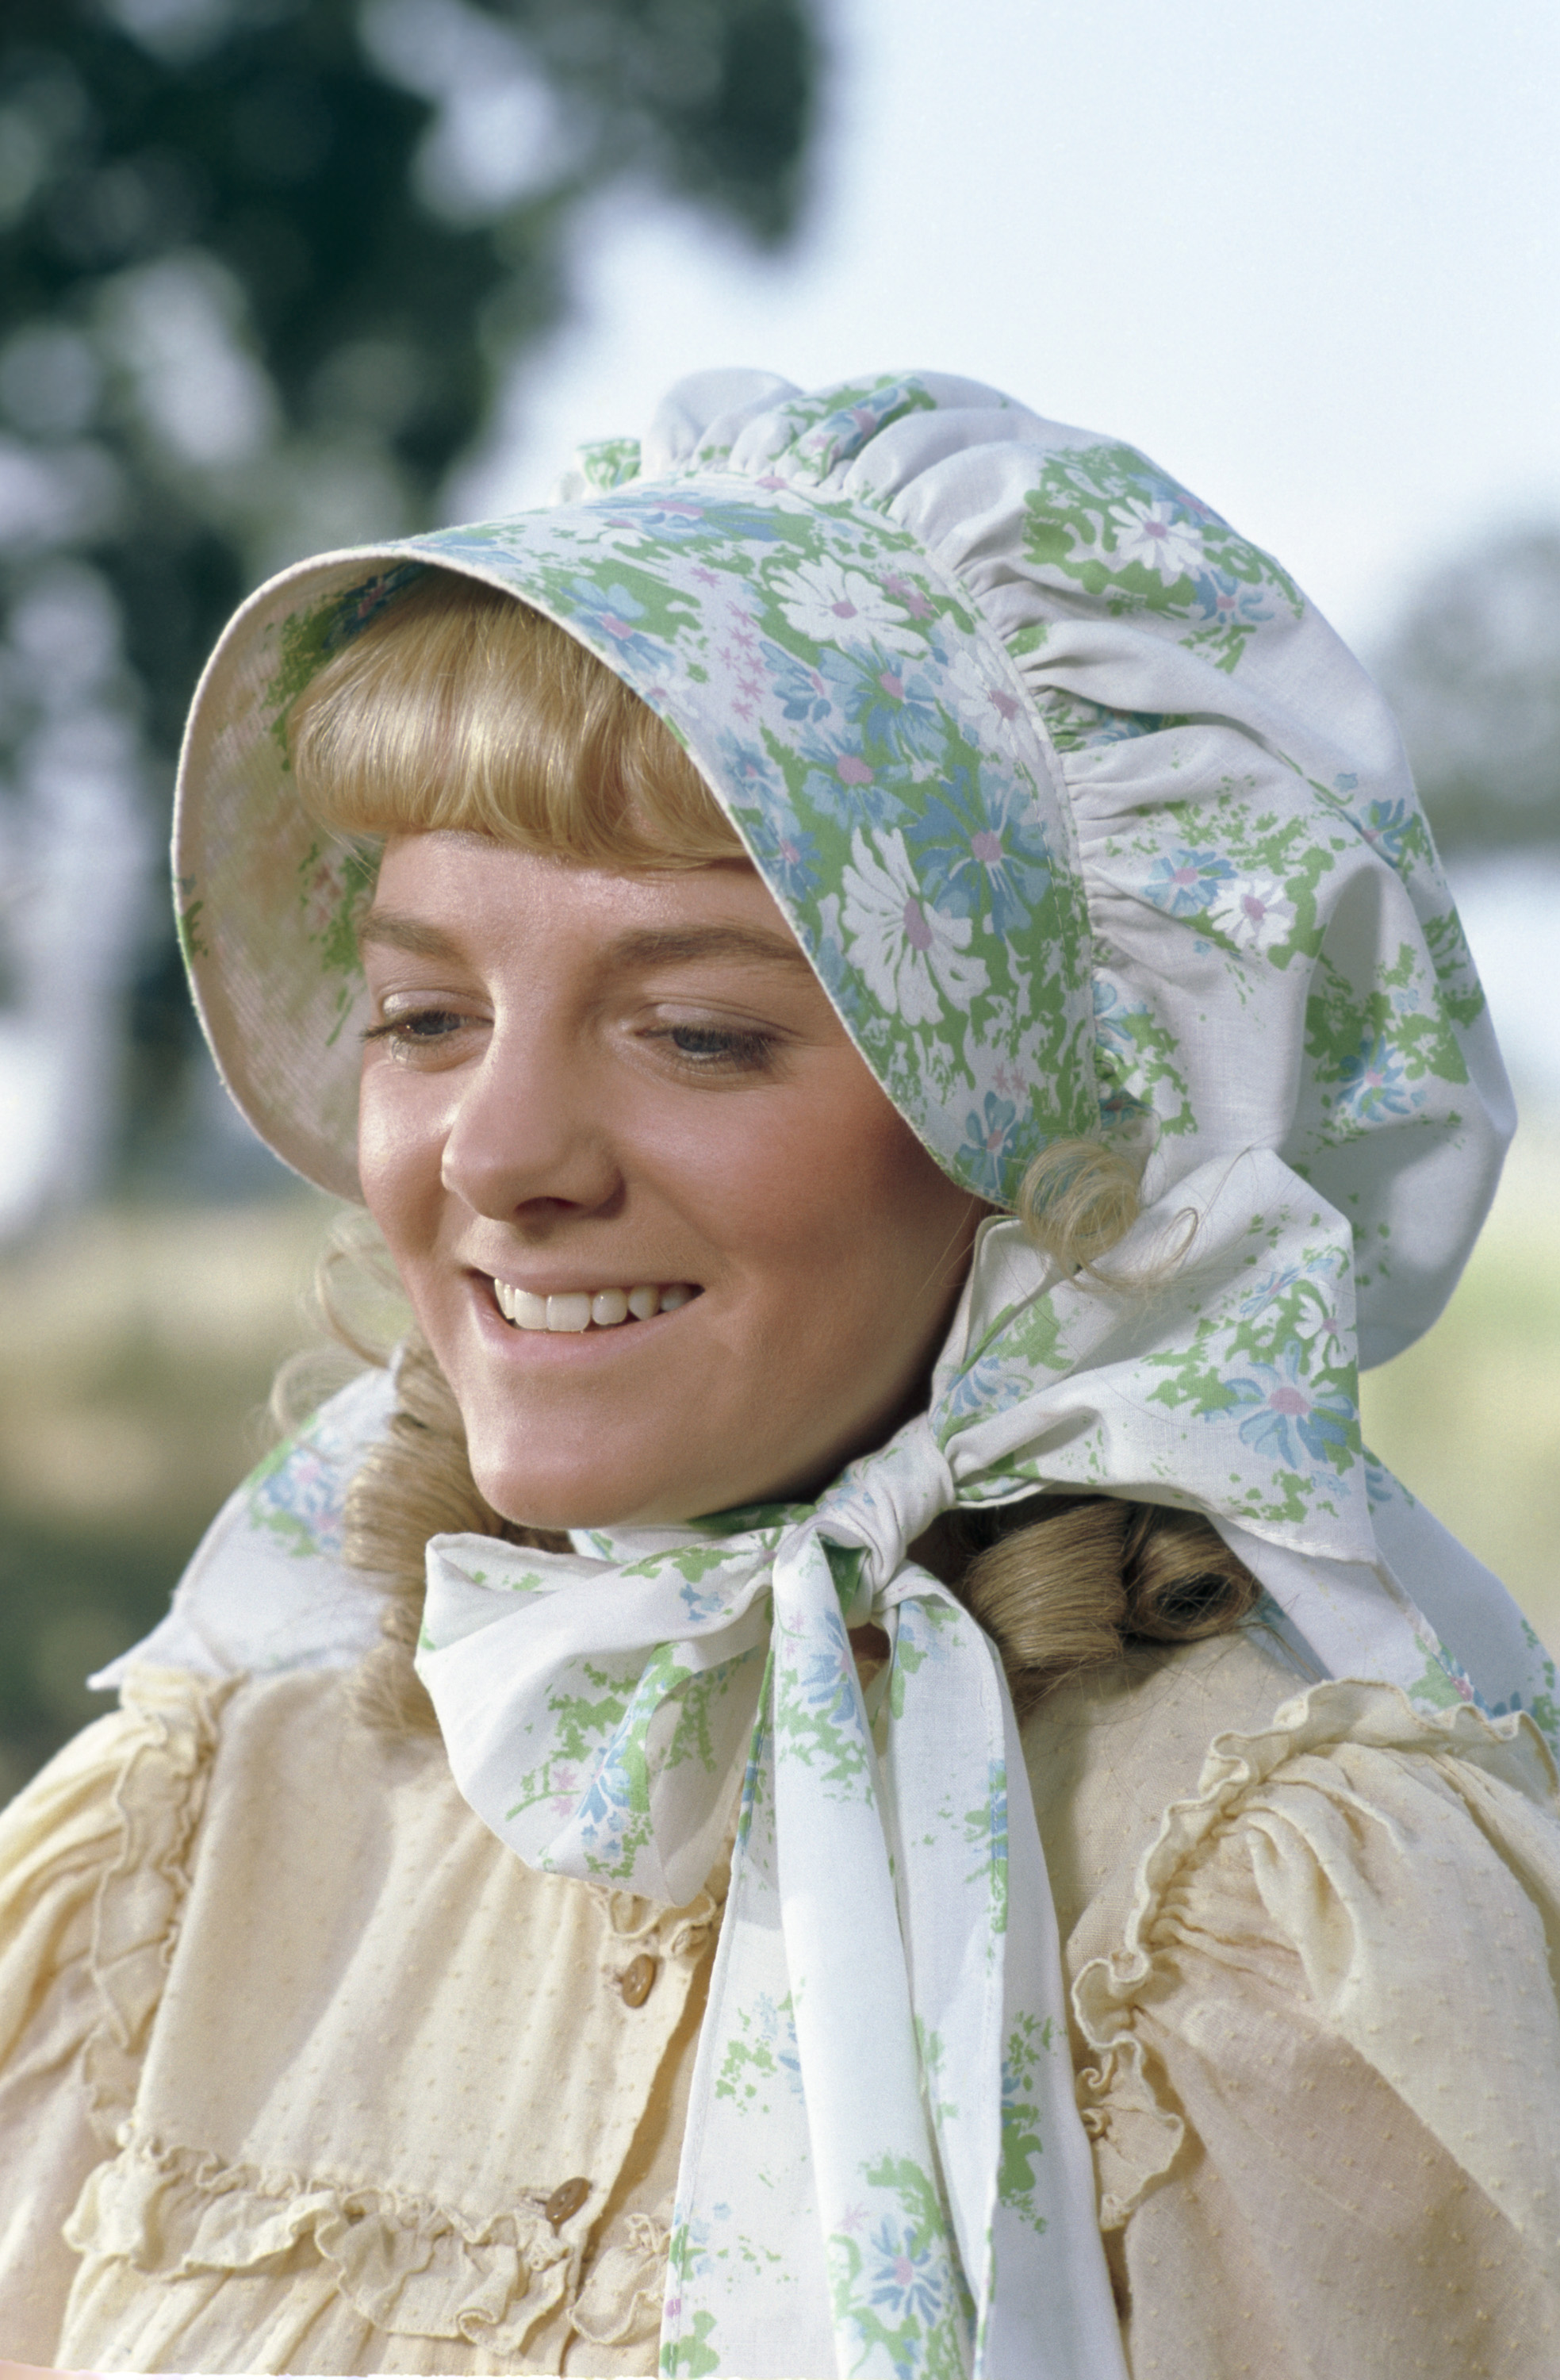 Alison Arngrim on "Little House on the Prairie" circa 1980 | Source: Getty Images